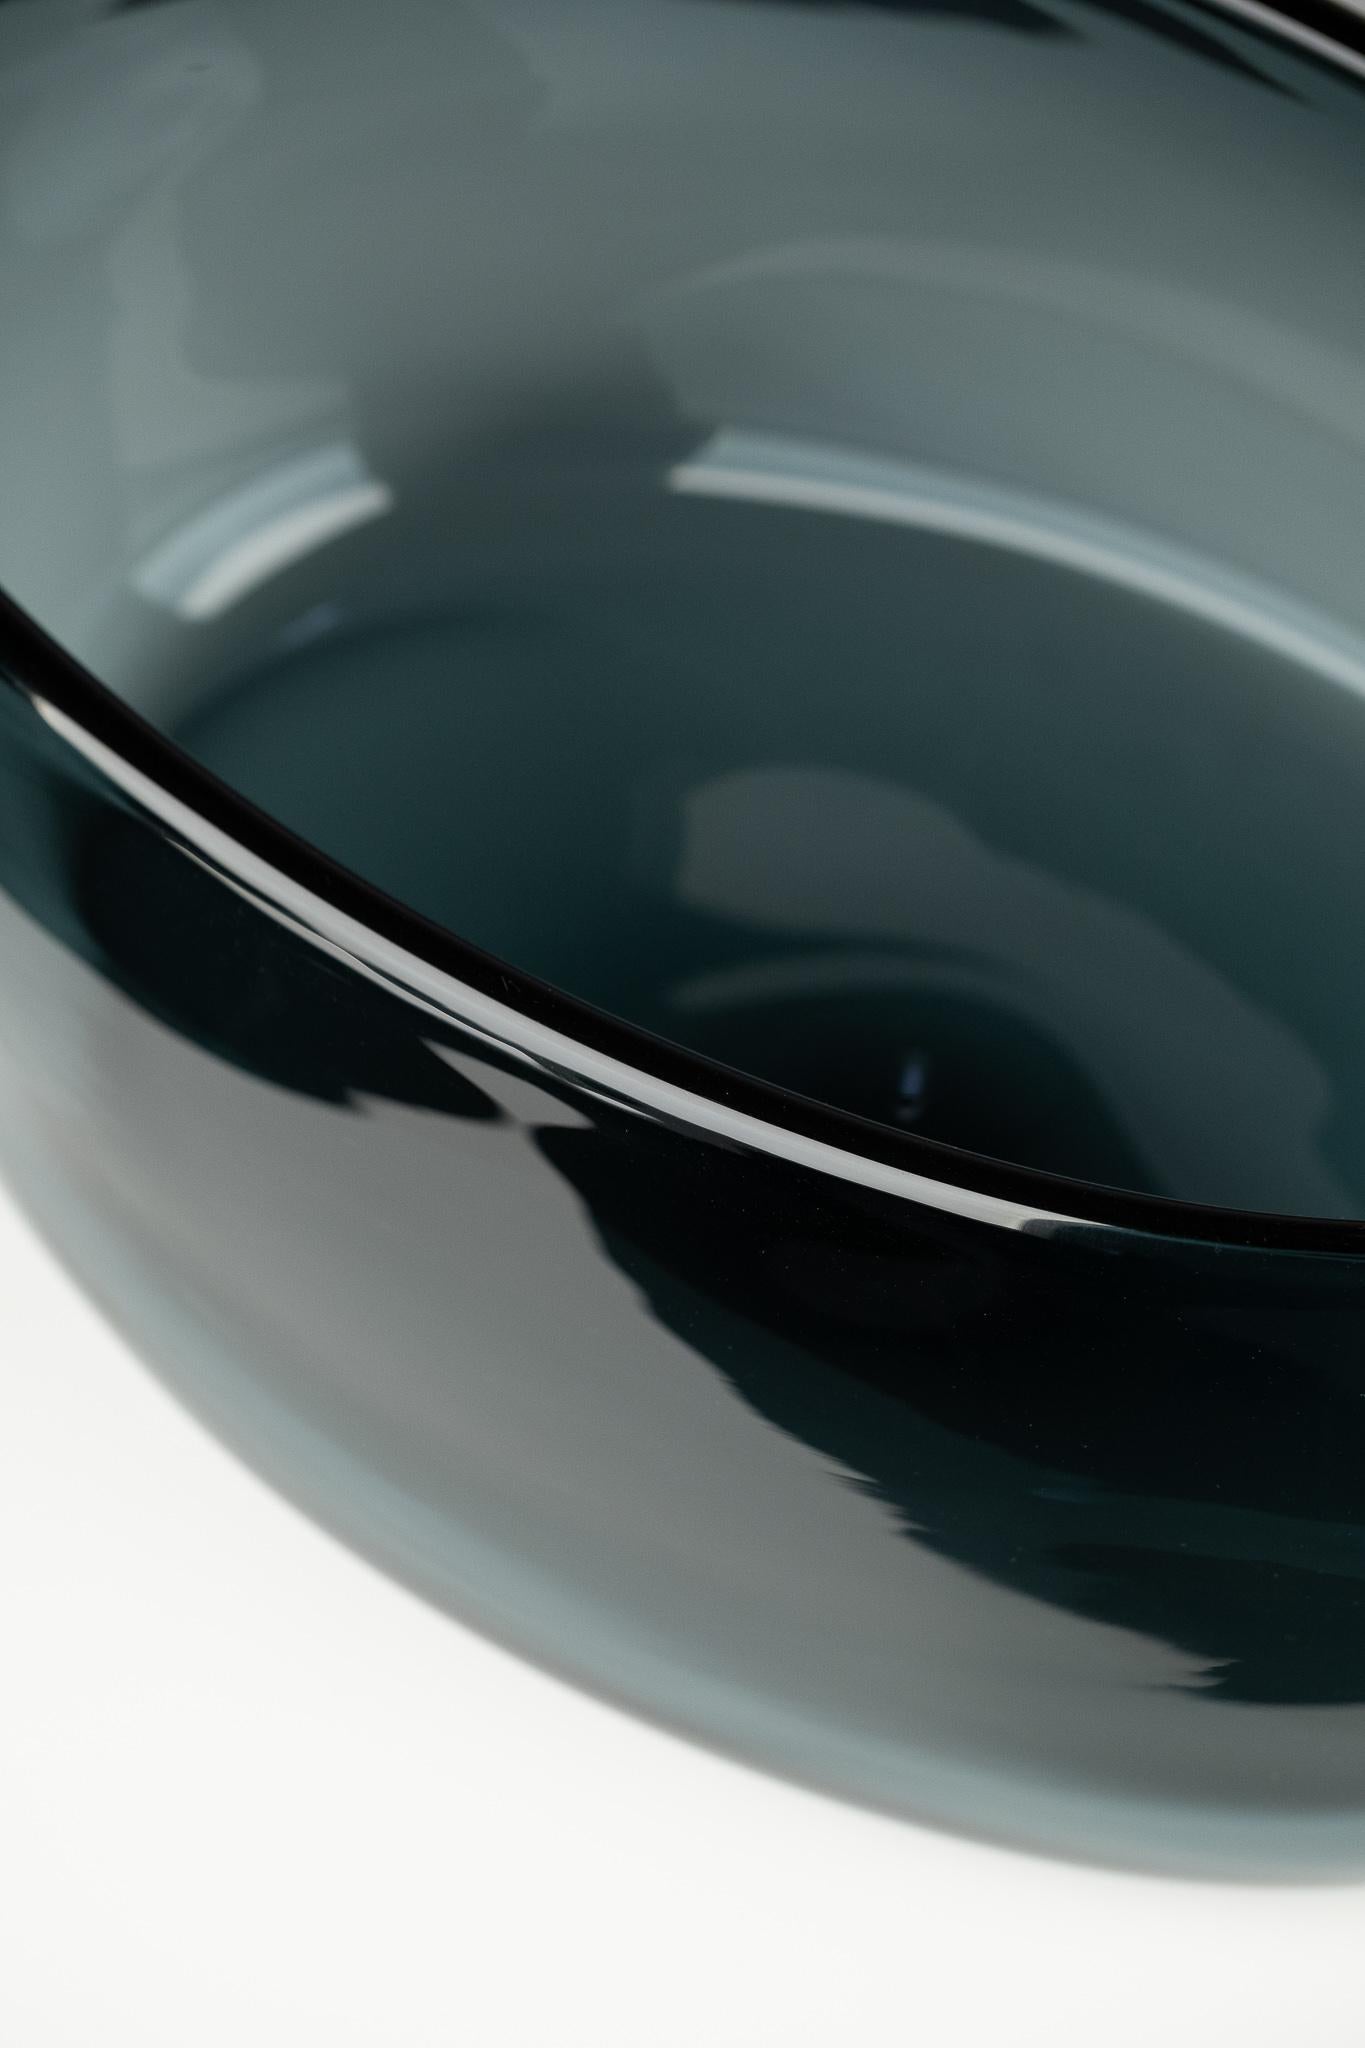 Ovale is a centrepiece from the Essenziali Collection designed by Federico Peri for Purho in spring 2022.
Characterized by generous forms and oval lines enhanced by the use of a single pure colour, this tray sublimates the meaning of essentiality in